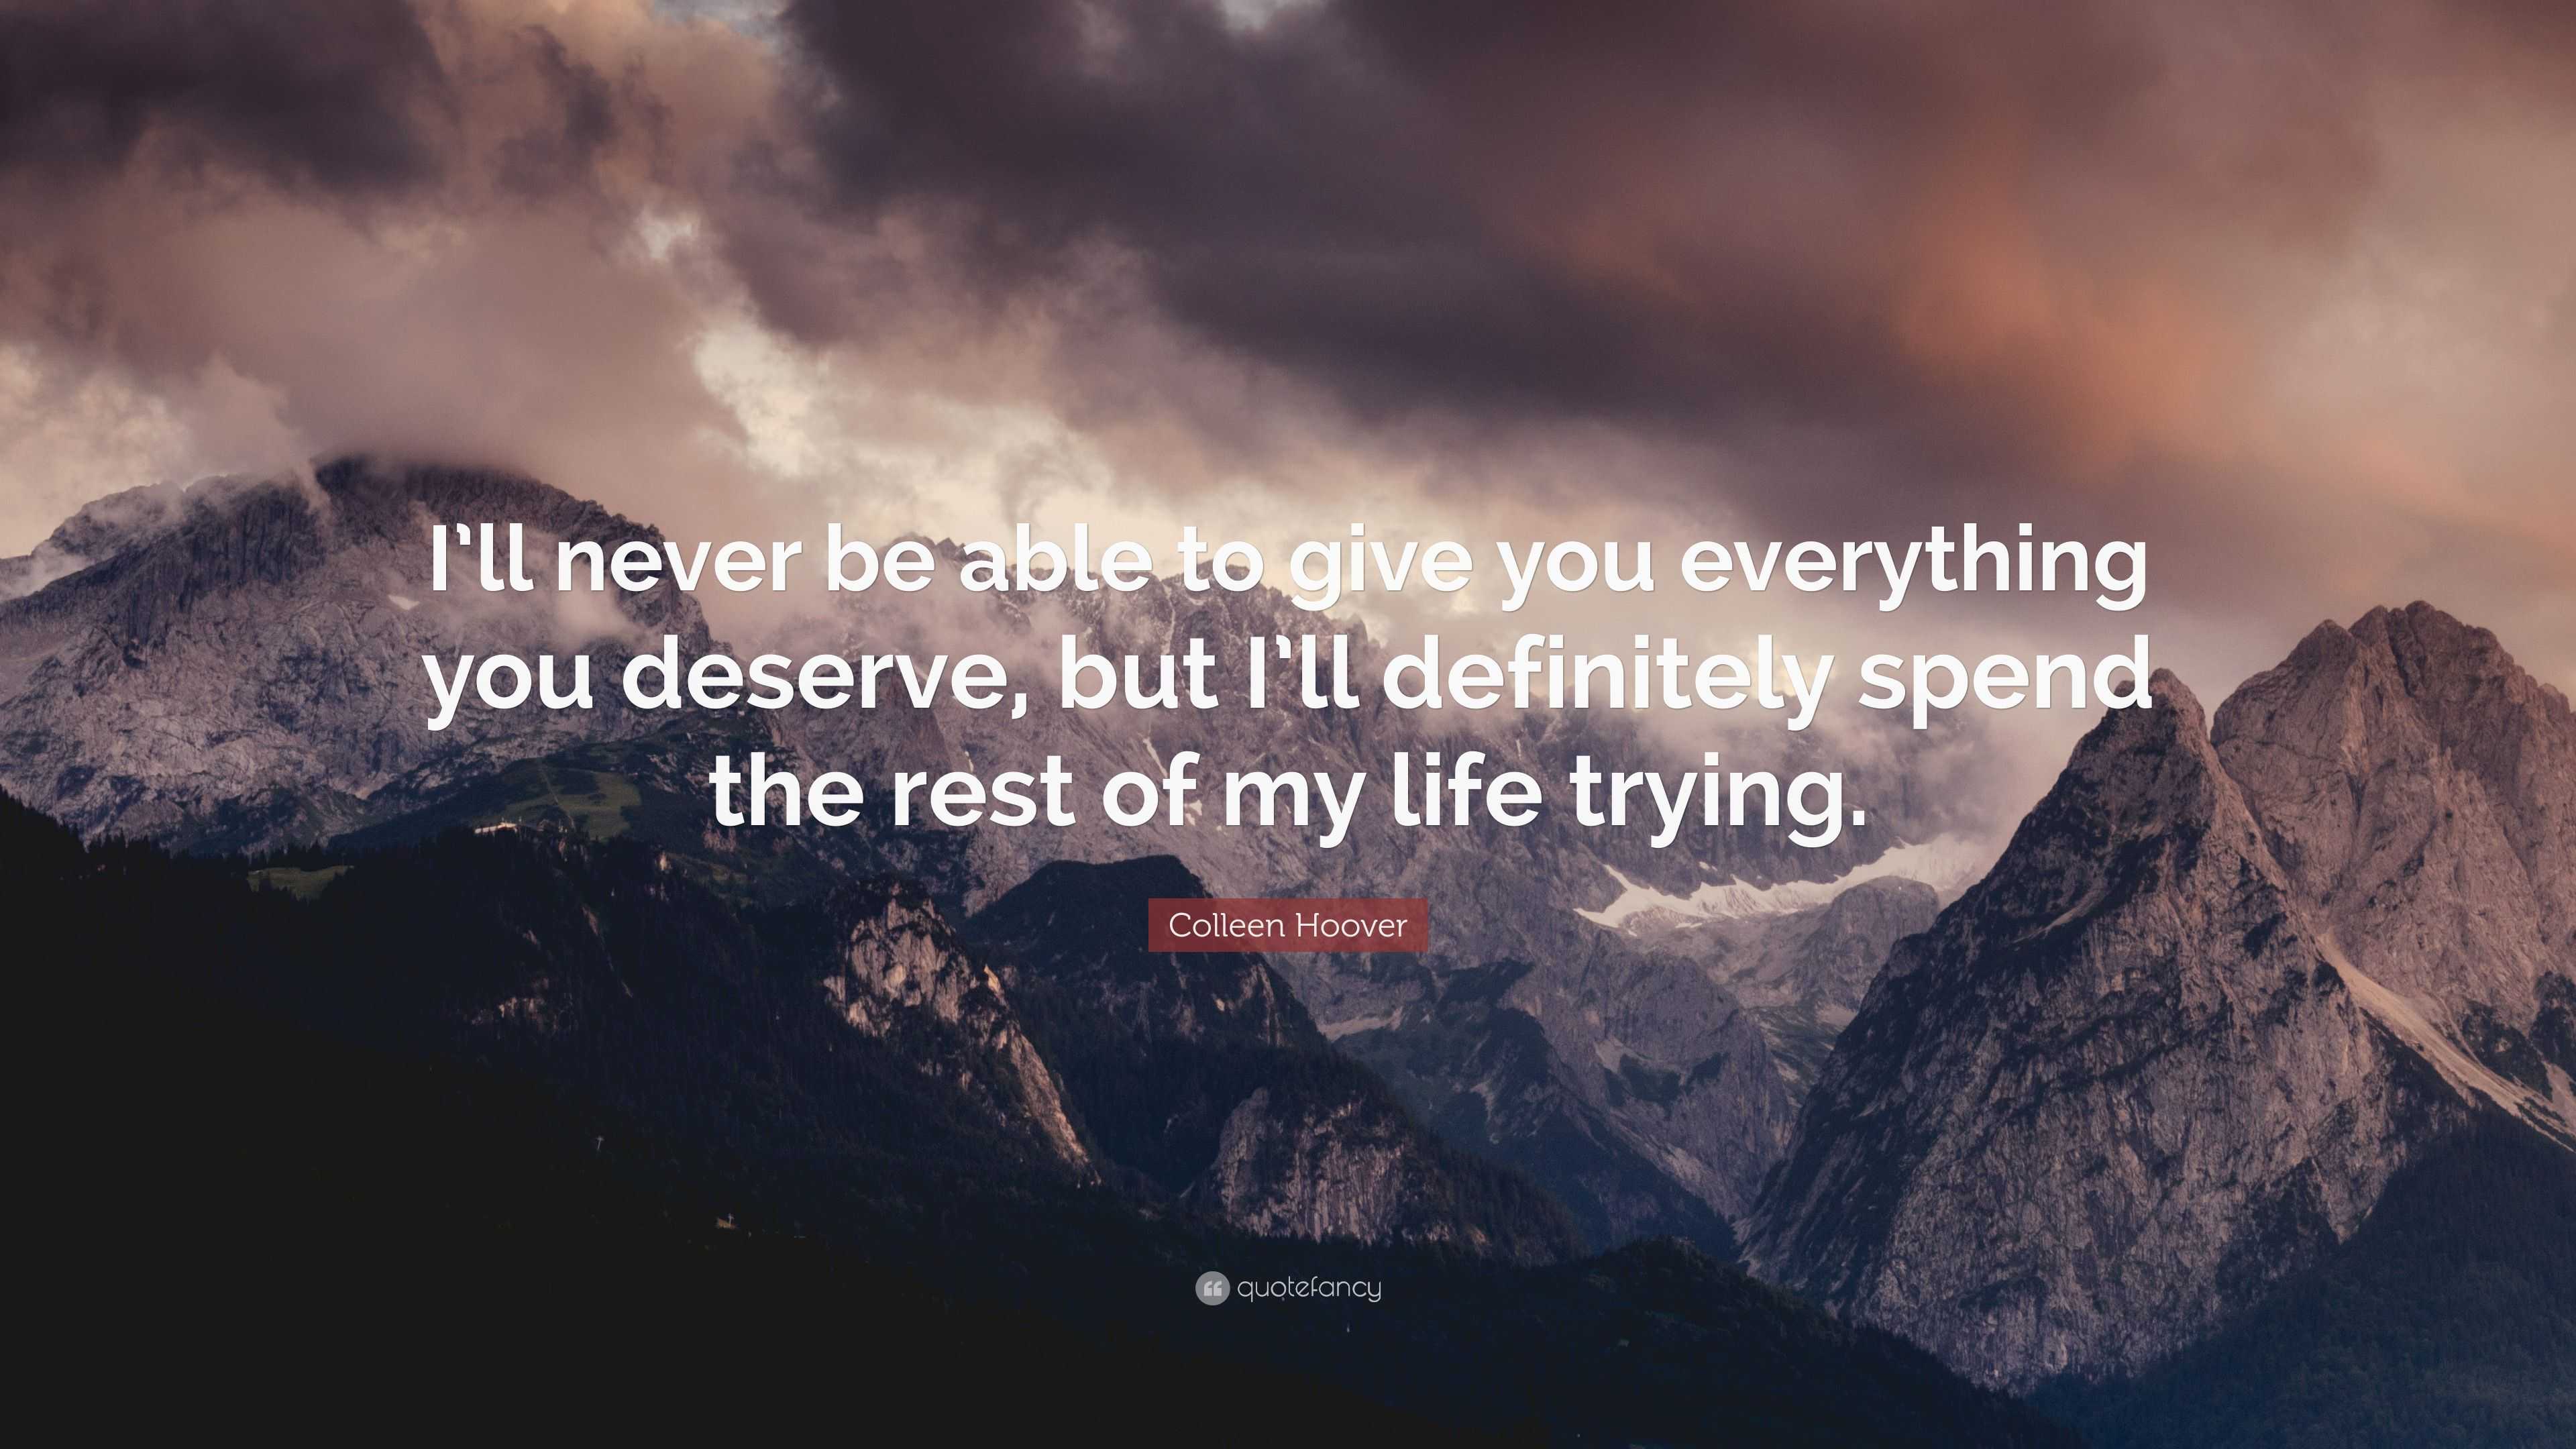 Colleen Hoover Quote: “I’ll never be able to give you everything you ...